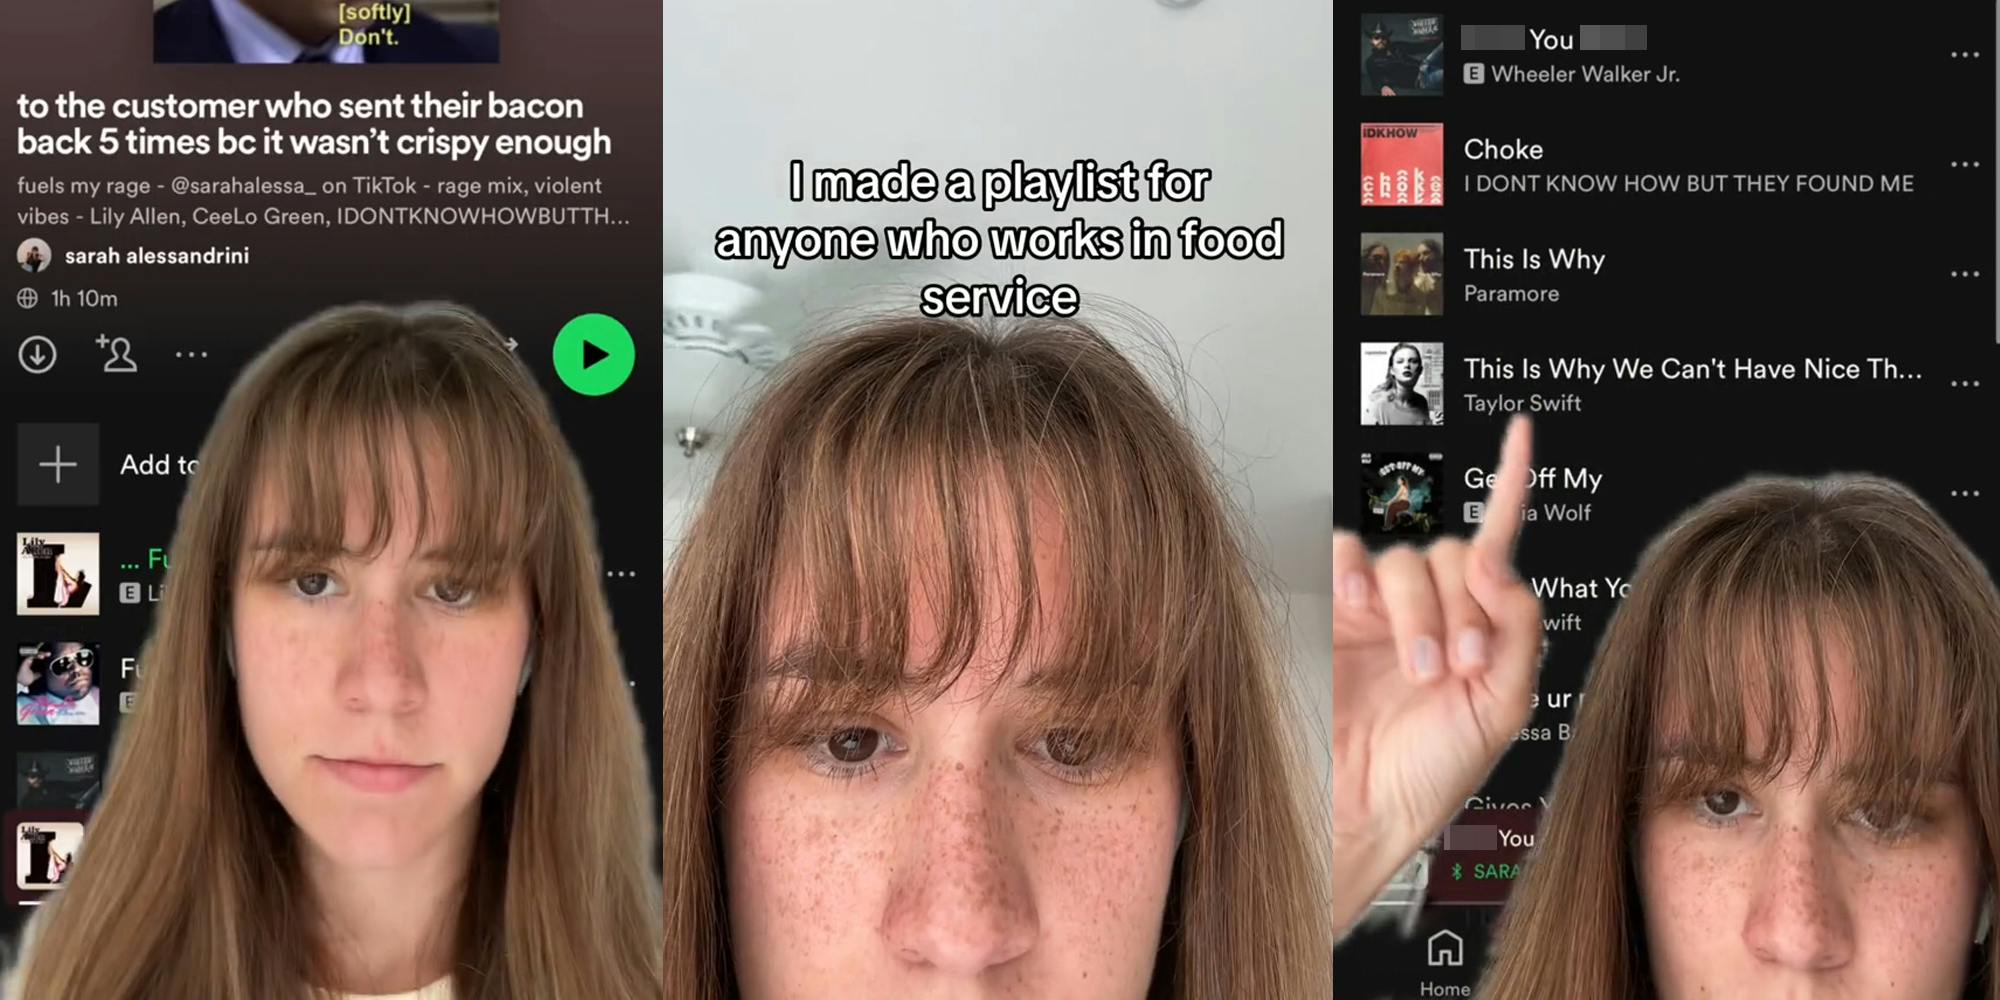 server greenscreen TikTok over Spotify playlist (l) server with caption "I made a playlist for anyone who works in food service" (c) server greenscreen TikTok over Spotify playlist (r)